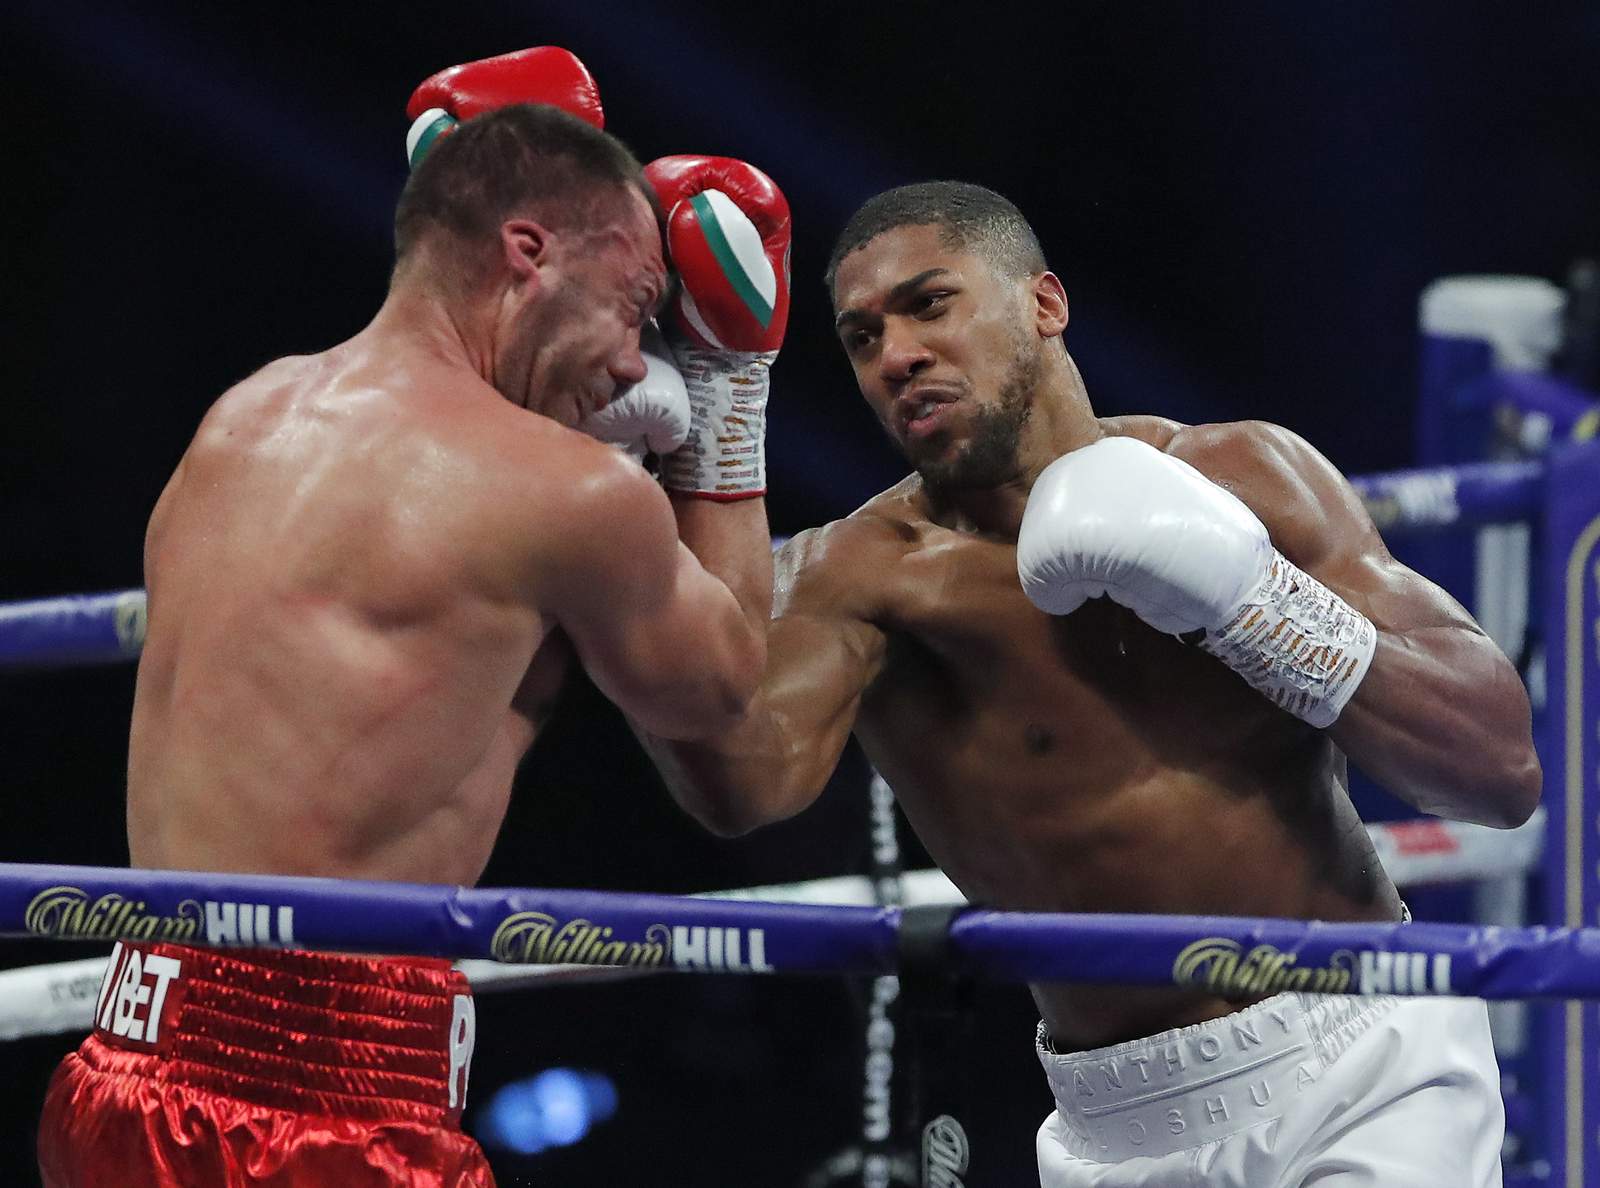 Joshua retains heavyweight belts with 9th-round KO of Pulev